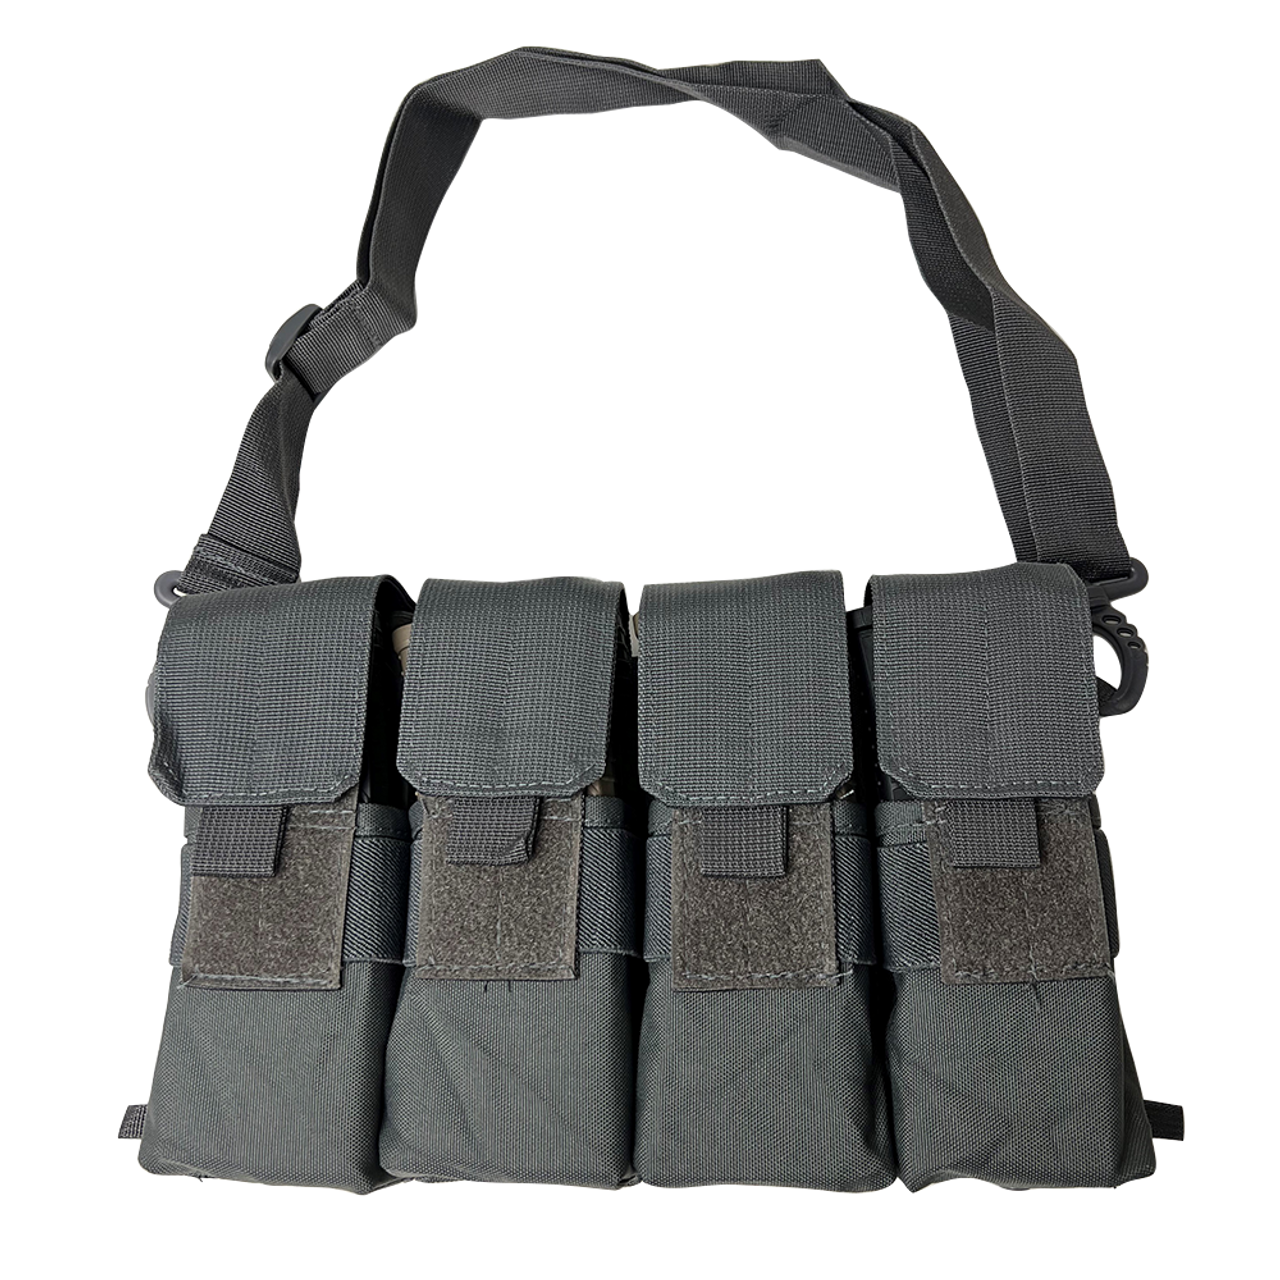 NcSTAR CVMARC3044U 223/556 Mag Carrier and Pouch Holds 8 30 Round Magazines